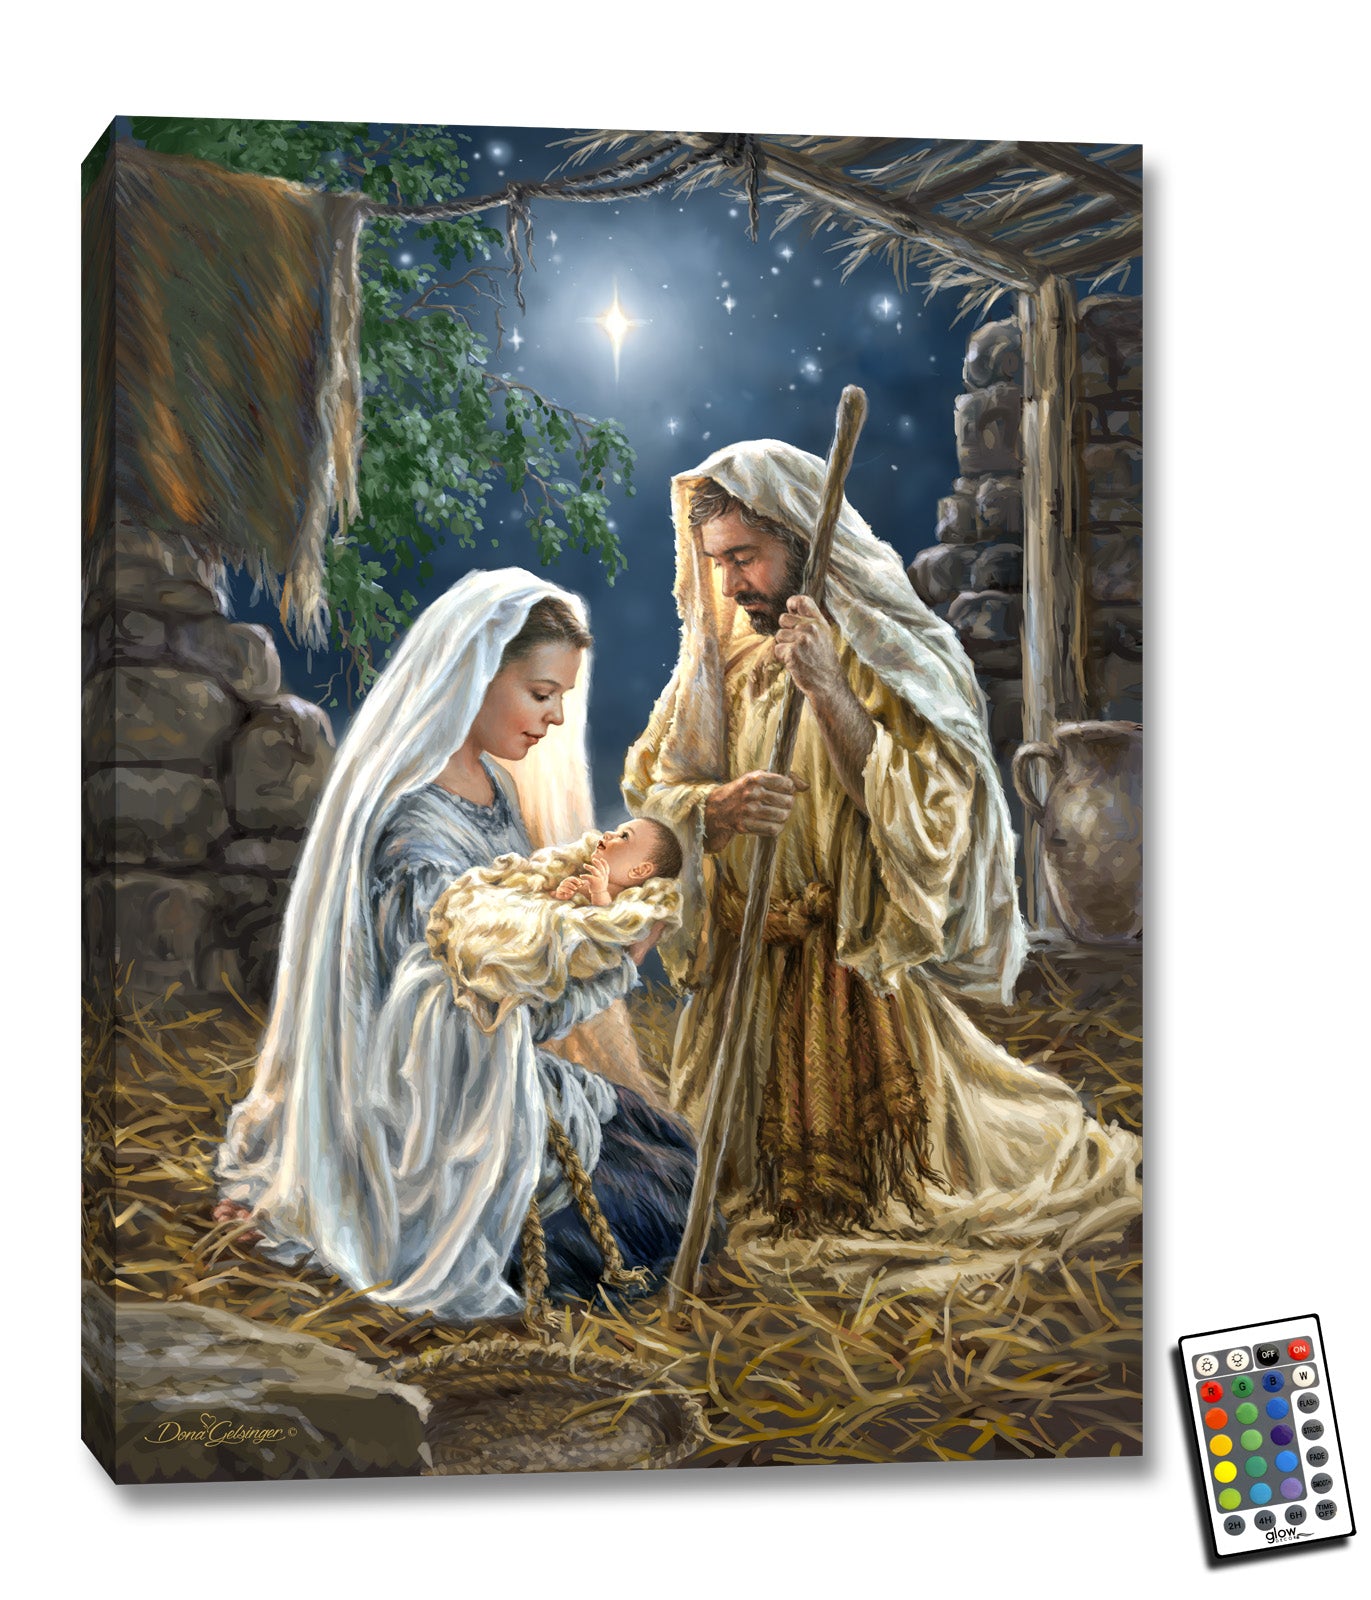  This beautiful piece captures the essence of the Nativity scene, with Mary holding baby Jesus and Joseph watching over them in the manger. The bright star in the background adds to the magical atmosphere, transporting you to that special moment in time.